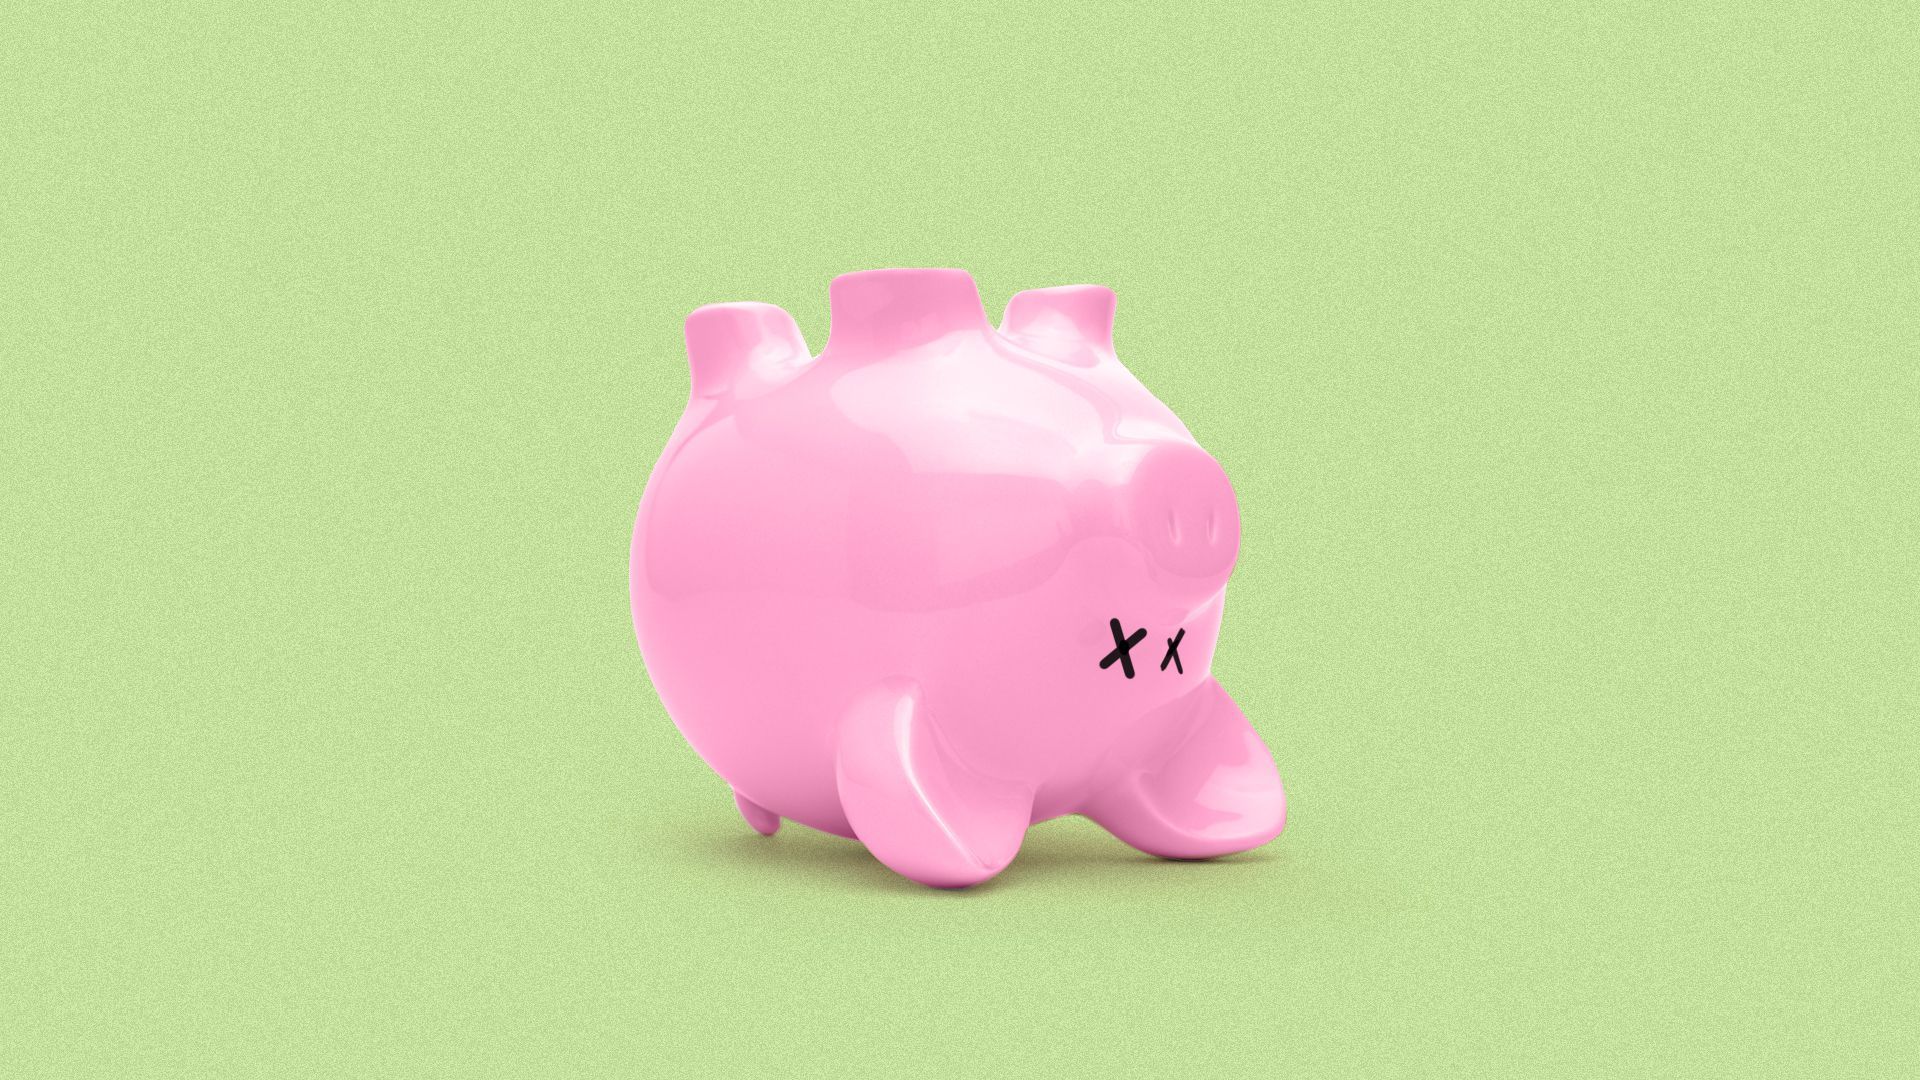 Picture of a piggy bank upside down